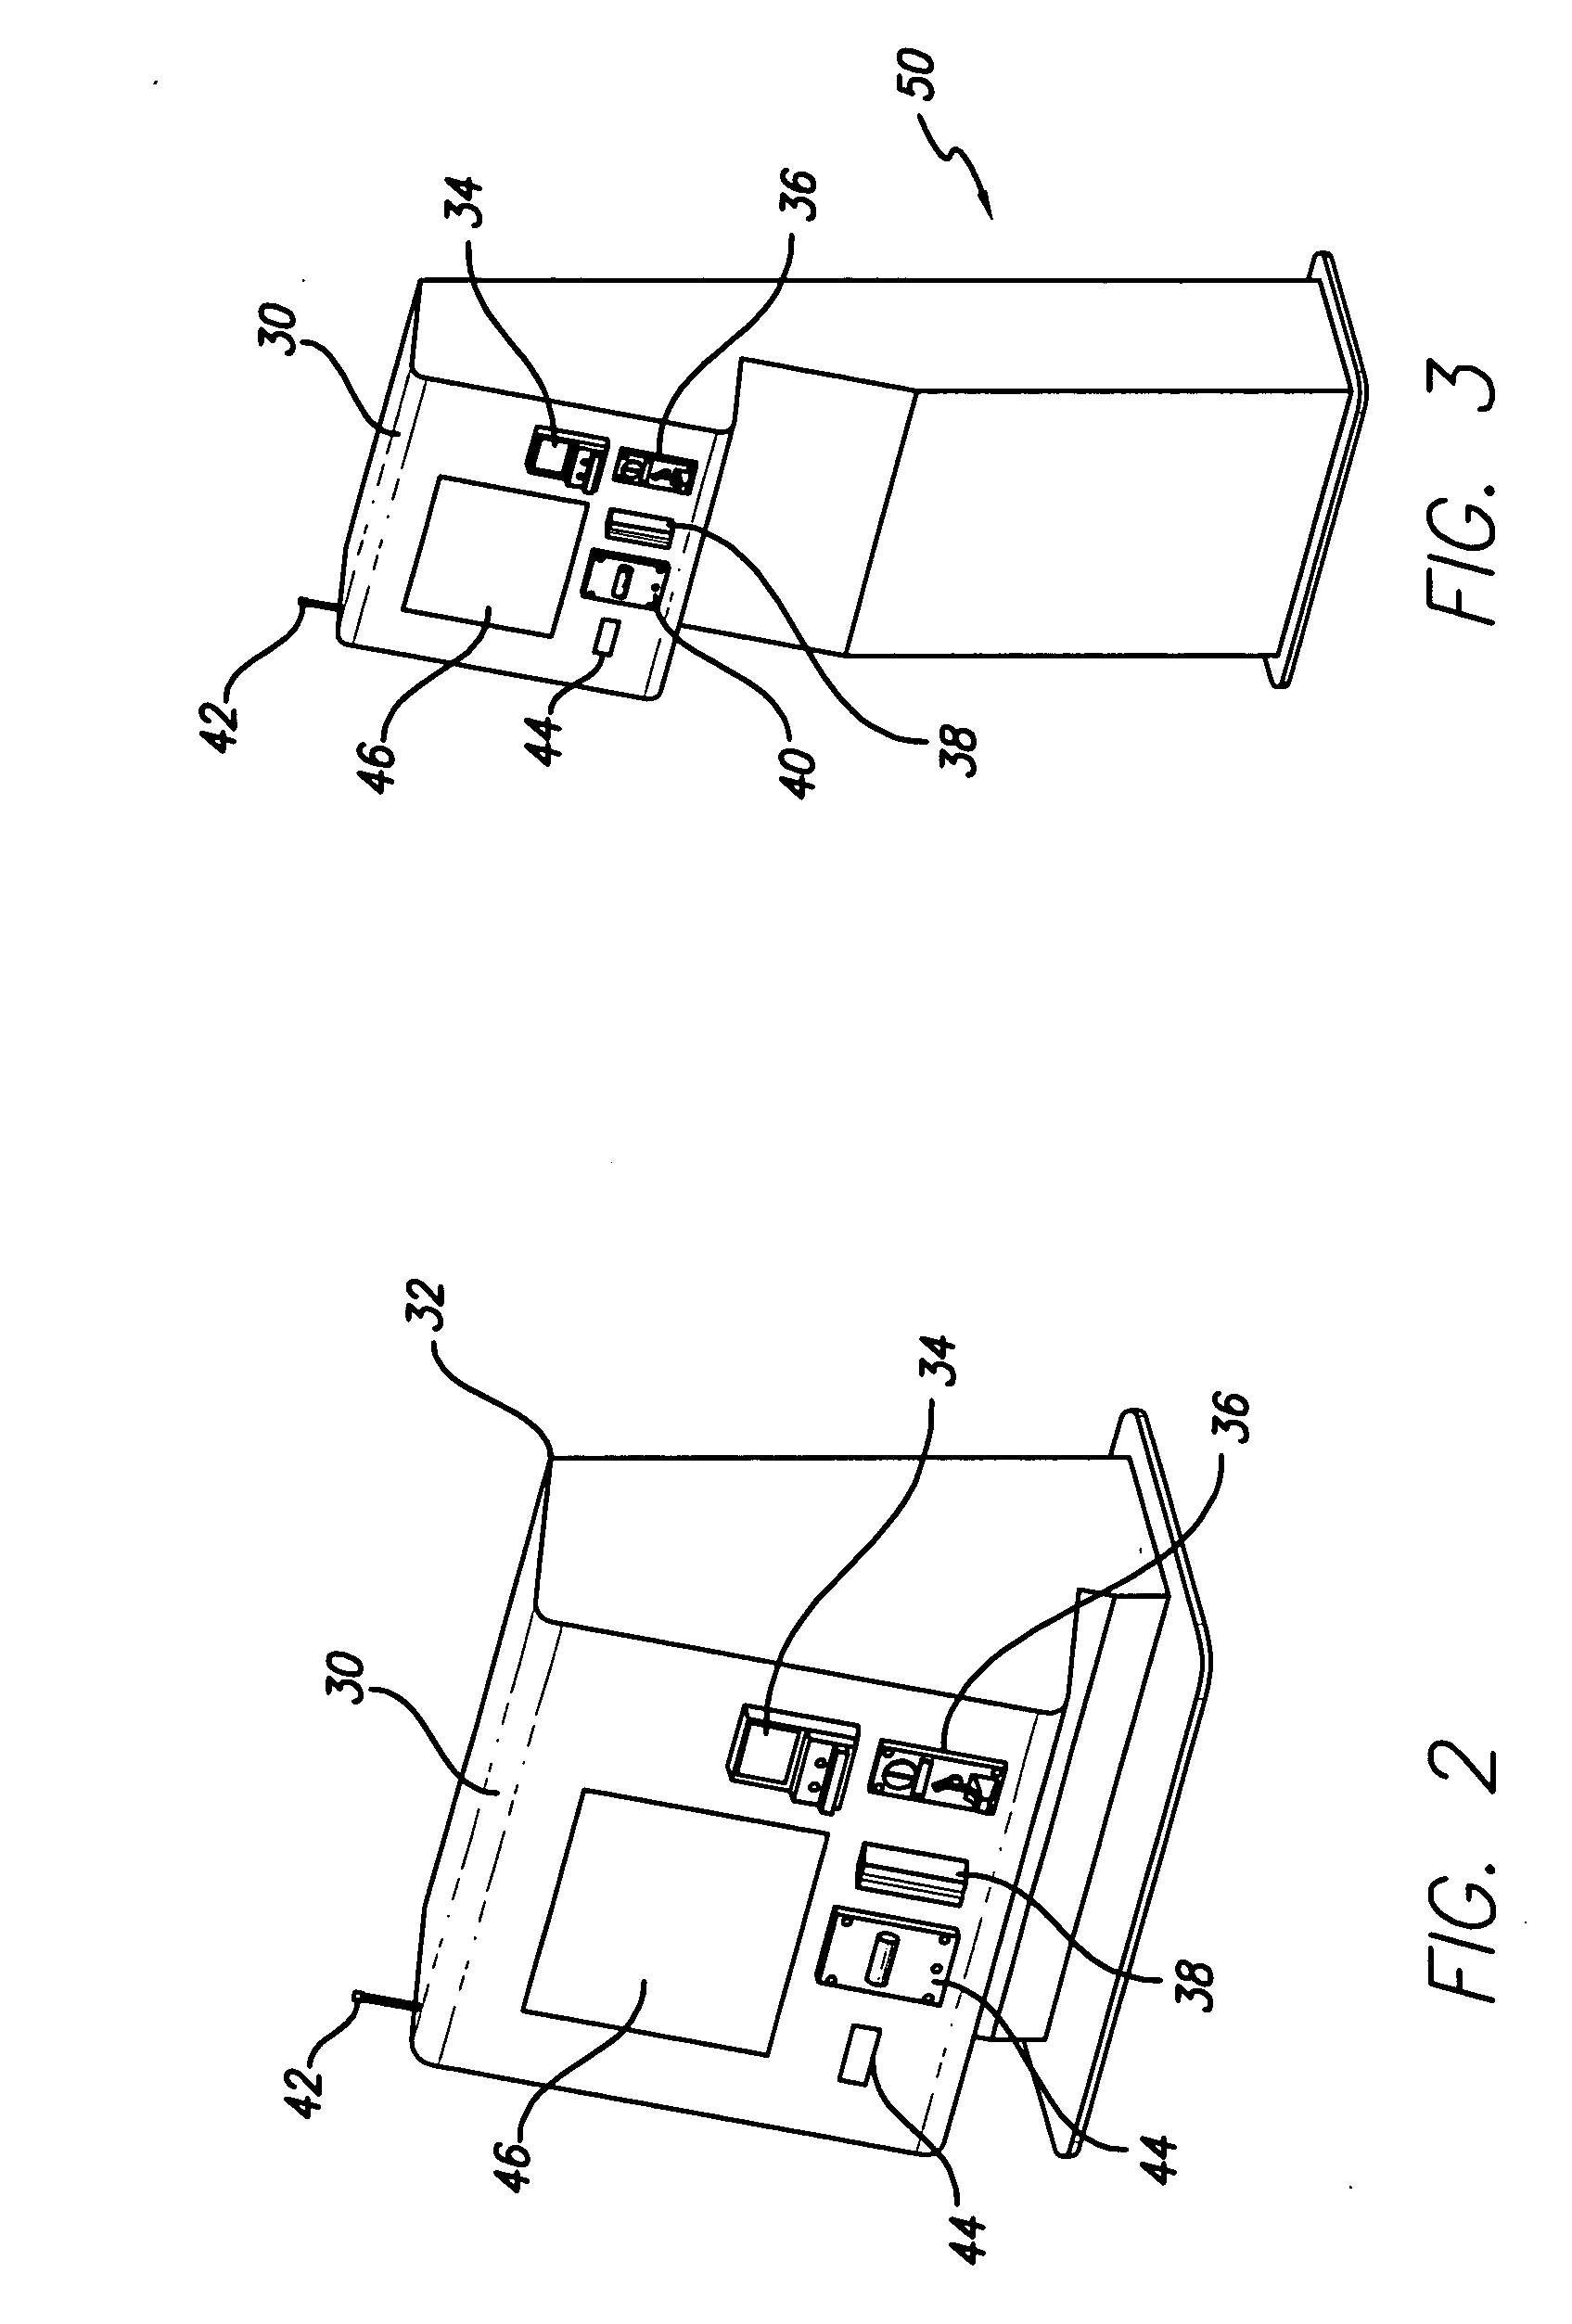 Electronic access control for amusement devices